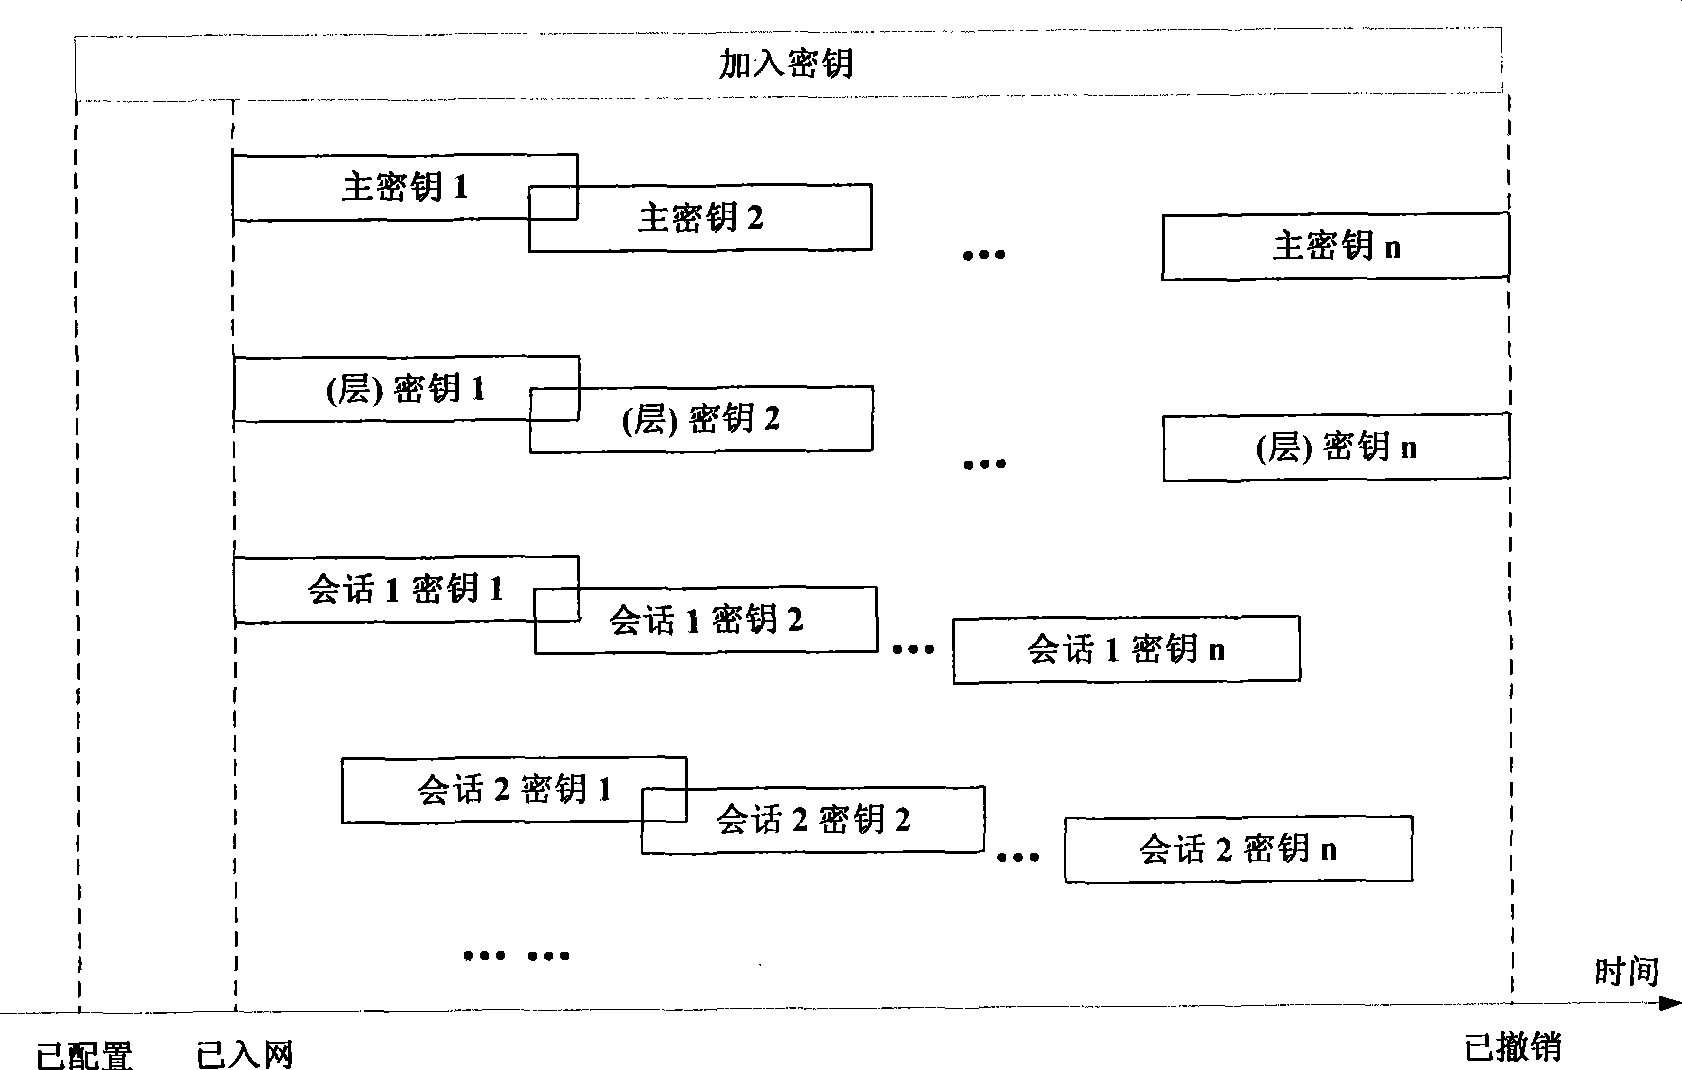 Industrial wireless network security communication implementation method based on cipher key